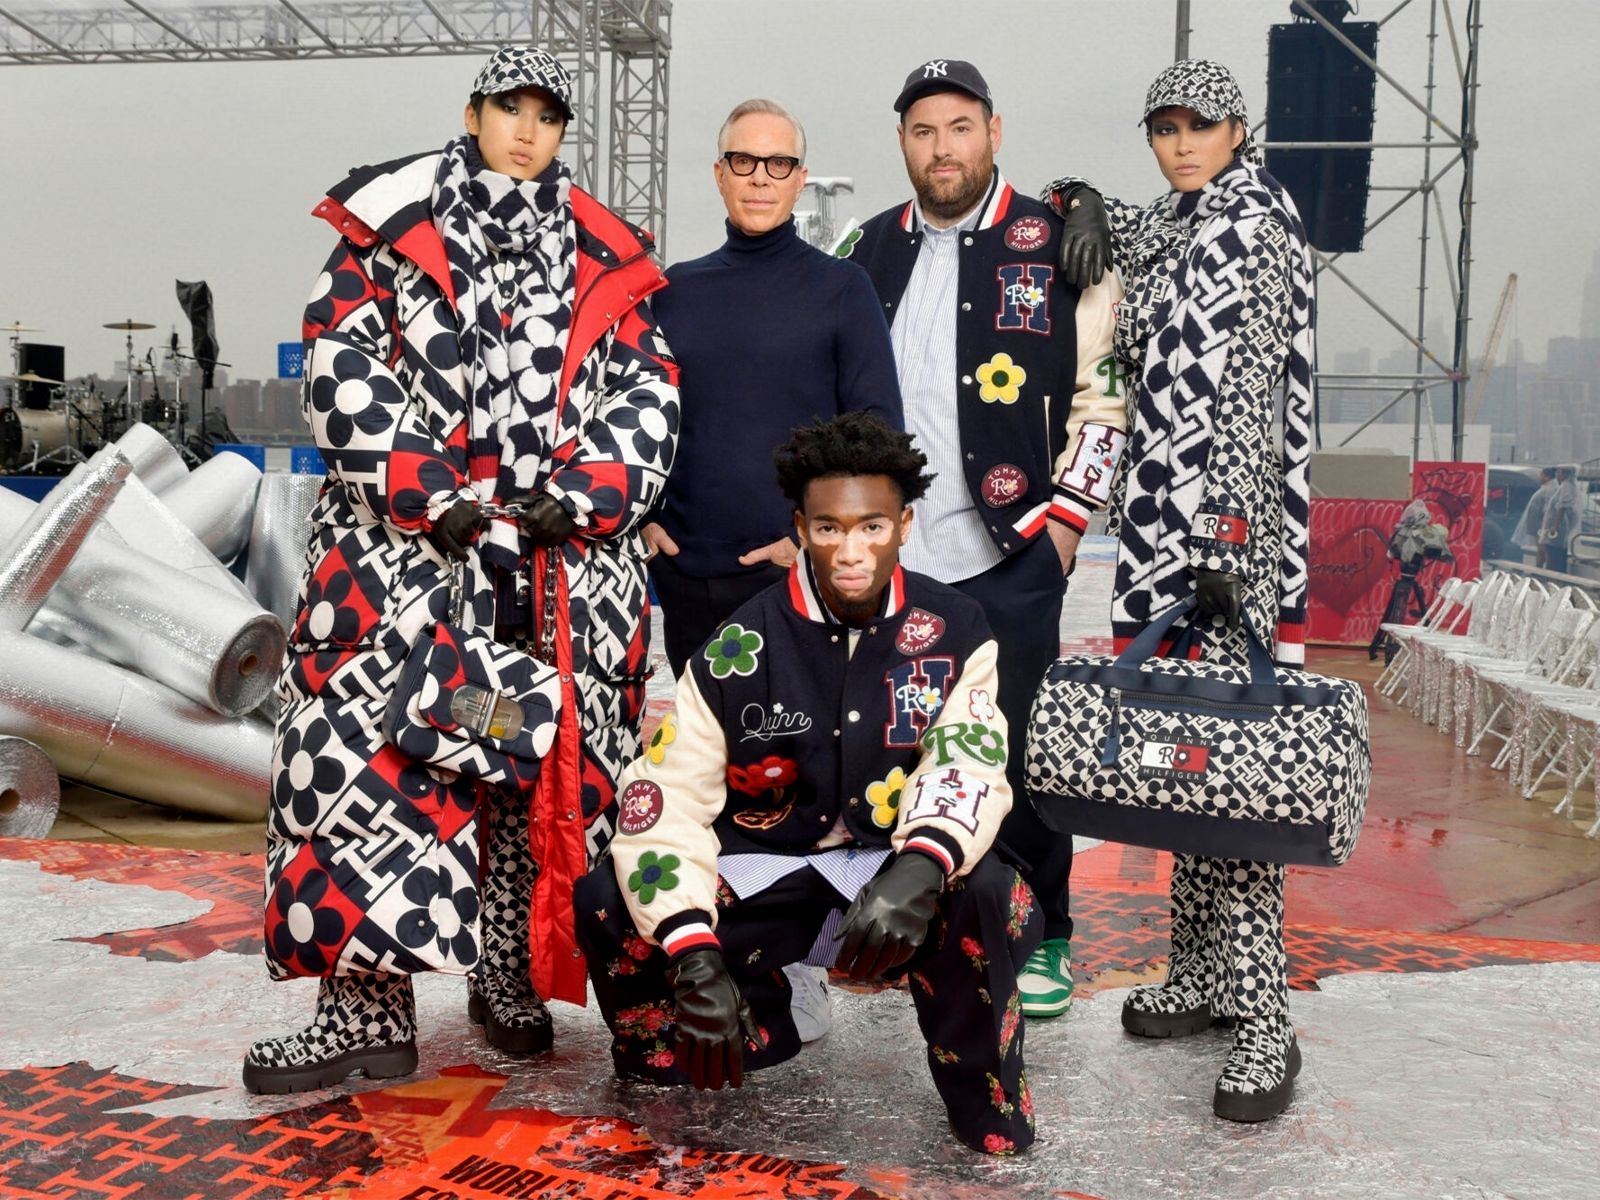 Tommy Hilfiger returned to NYFW with an experiential show in the multiverse